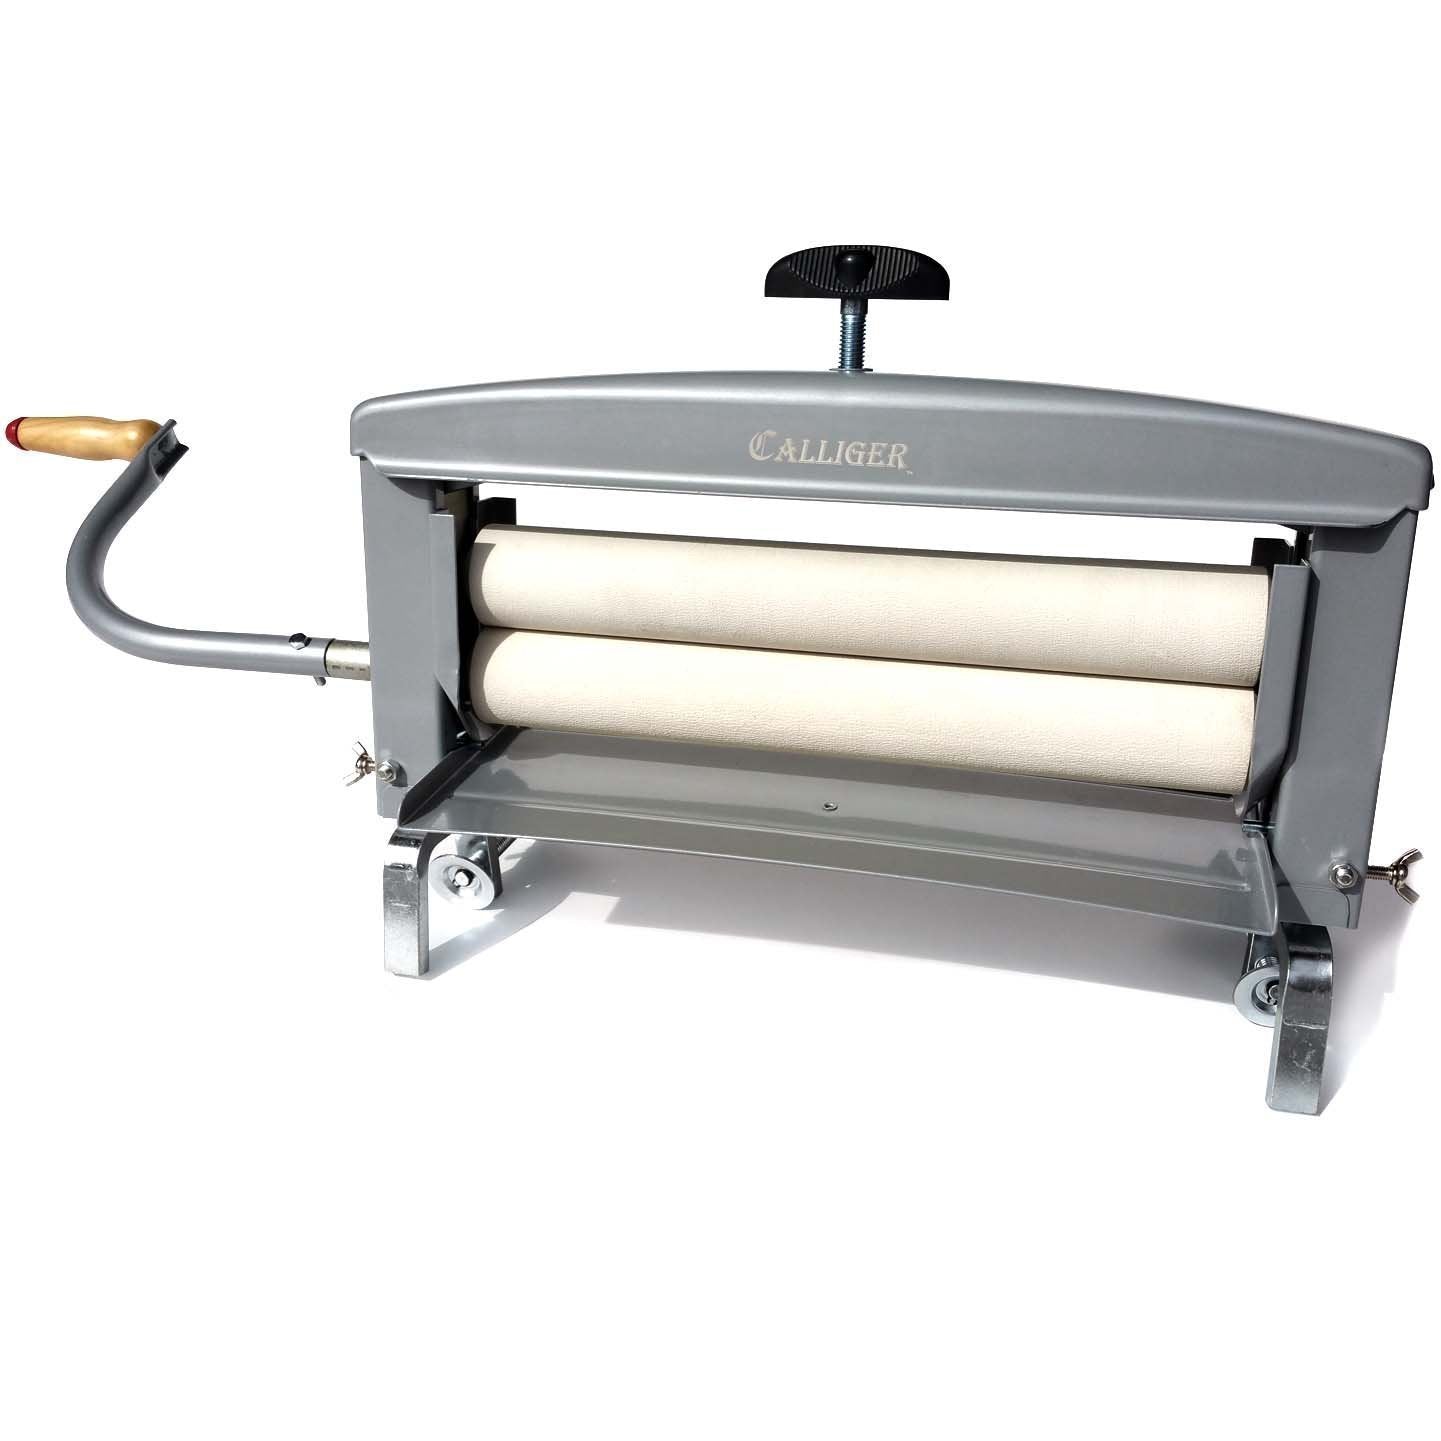 Calliger Hand Crank Clothes Wringer 14" Rollers - More Space to Wring Than Any Other Brand | Manual Off Grid Laundry Dryer | Perfect for Clothing, Towels, Chamois, Tile Grouting Sponges